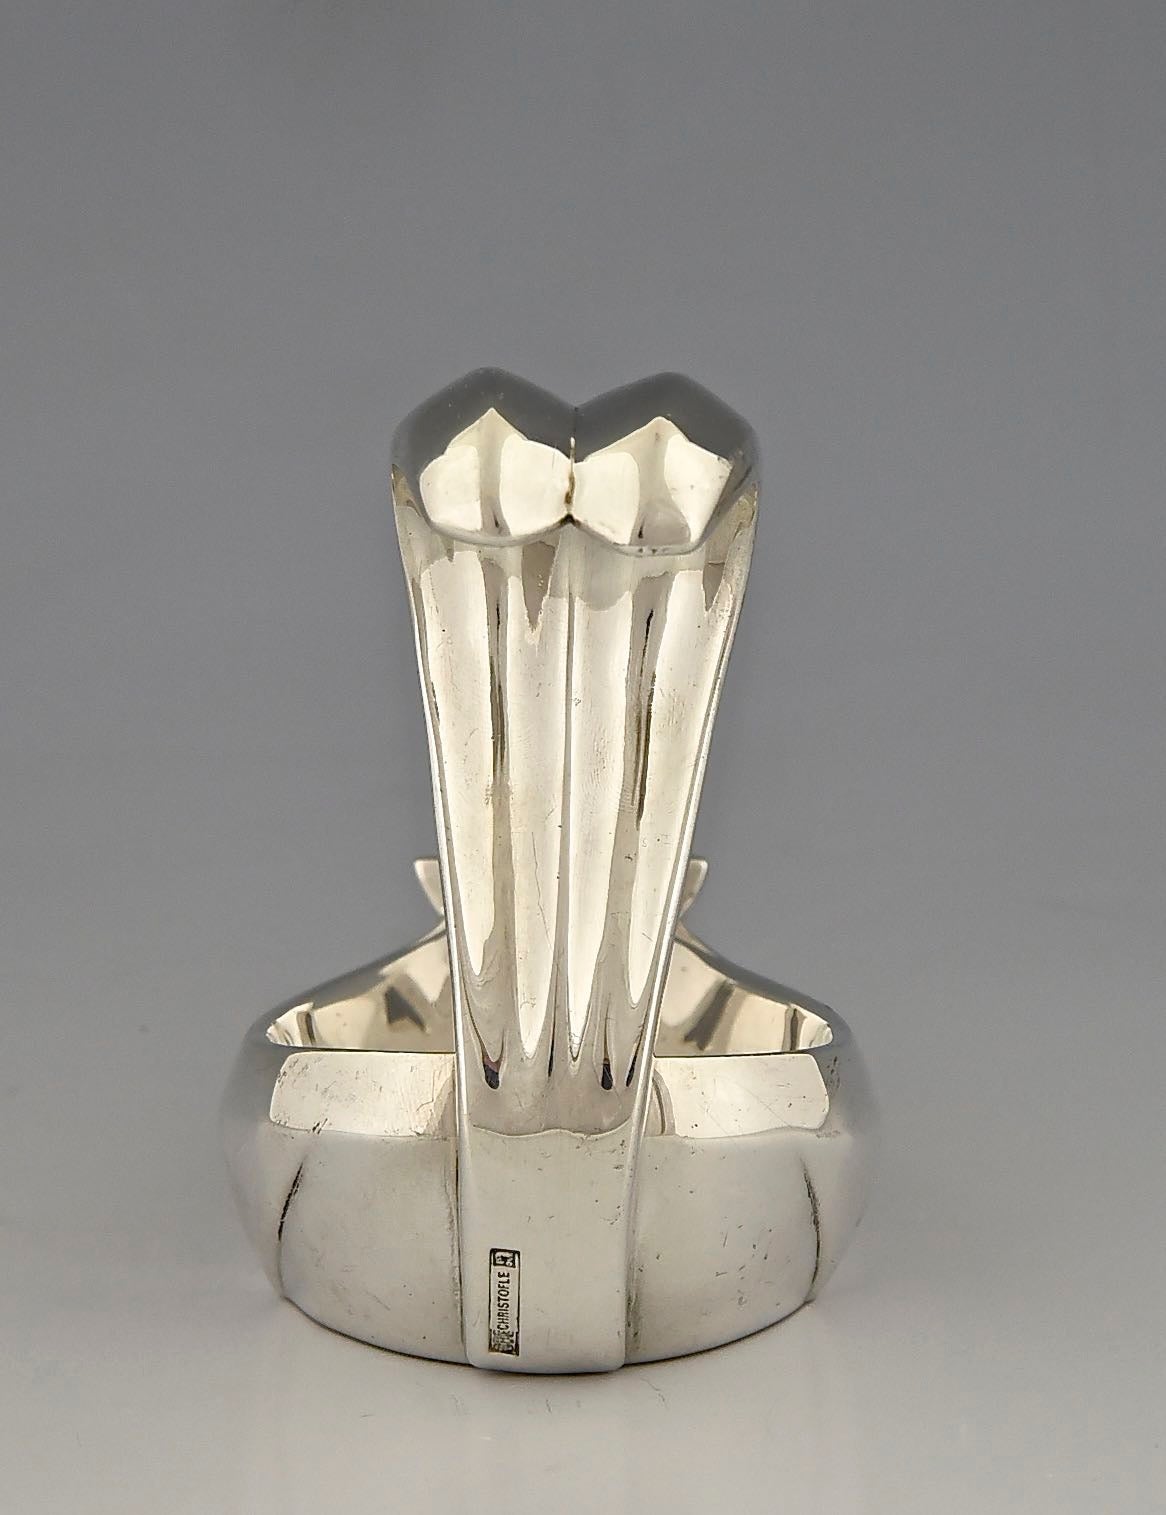 20th Century Art Deco Squirrel Tray Designed by A. De Ribes for Christofle, Silver Plated